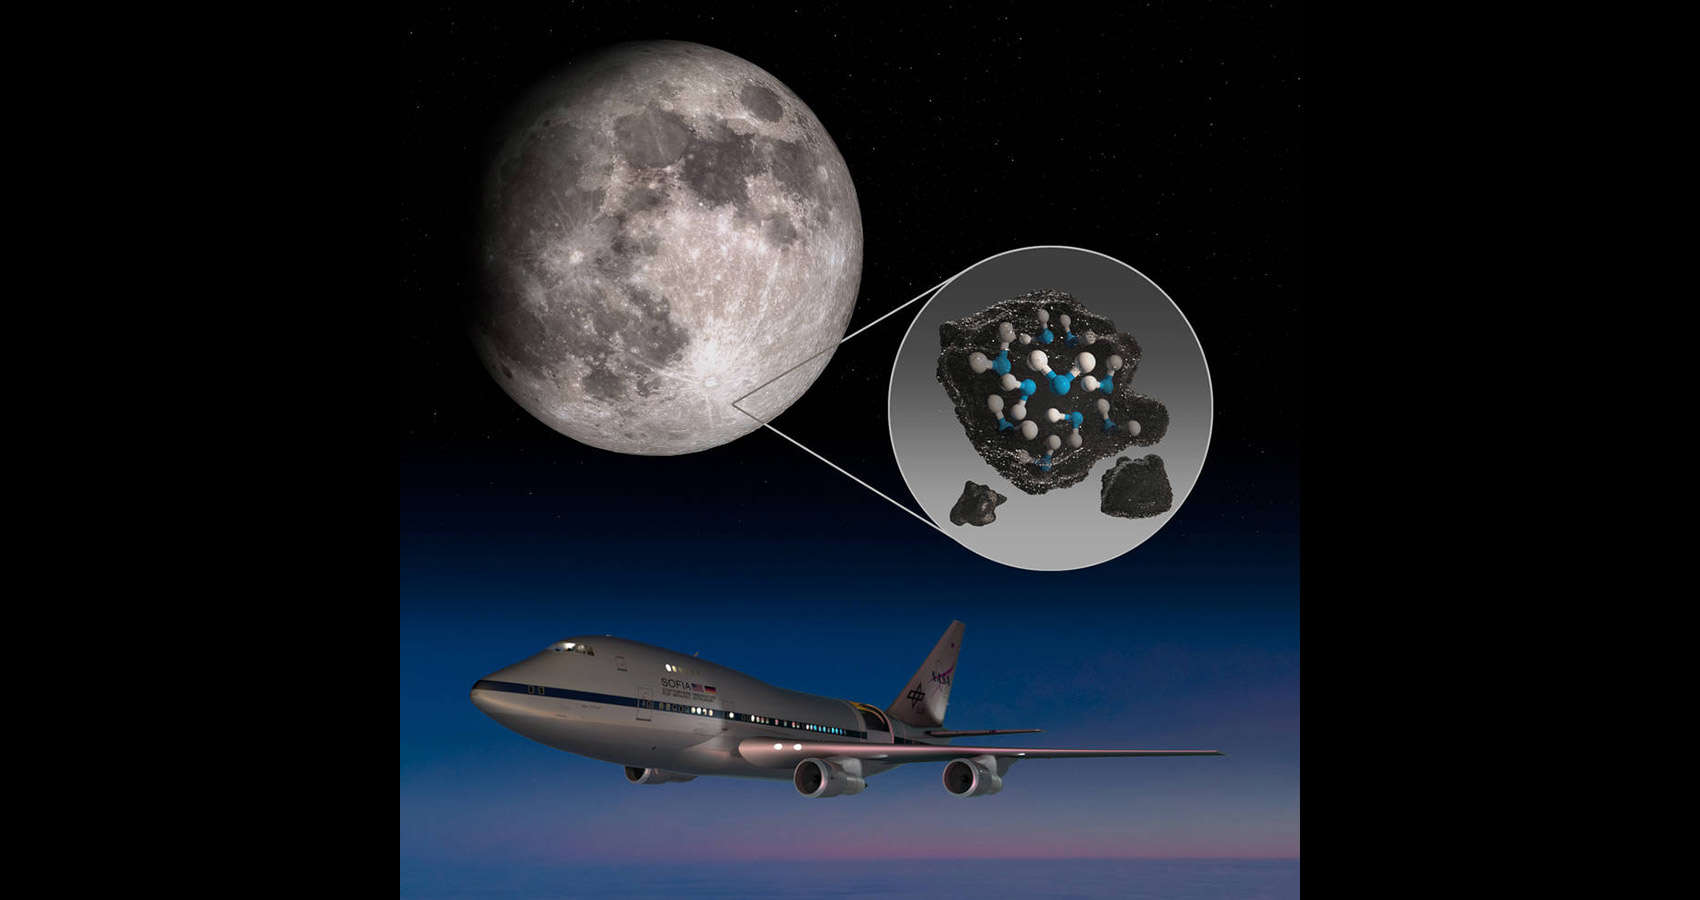 Water molecules distributed in the lunar surface material have been found by the SOFIA observatory, which flies inside a 747 jet. Credit: NASA/Daniel Rutter